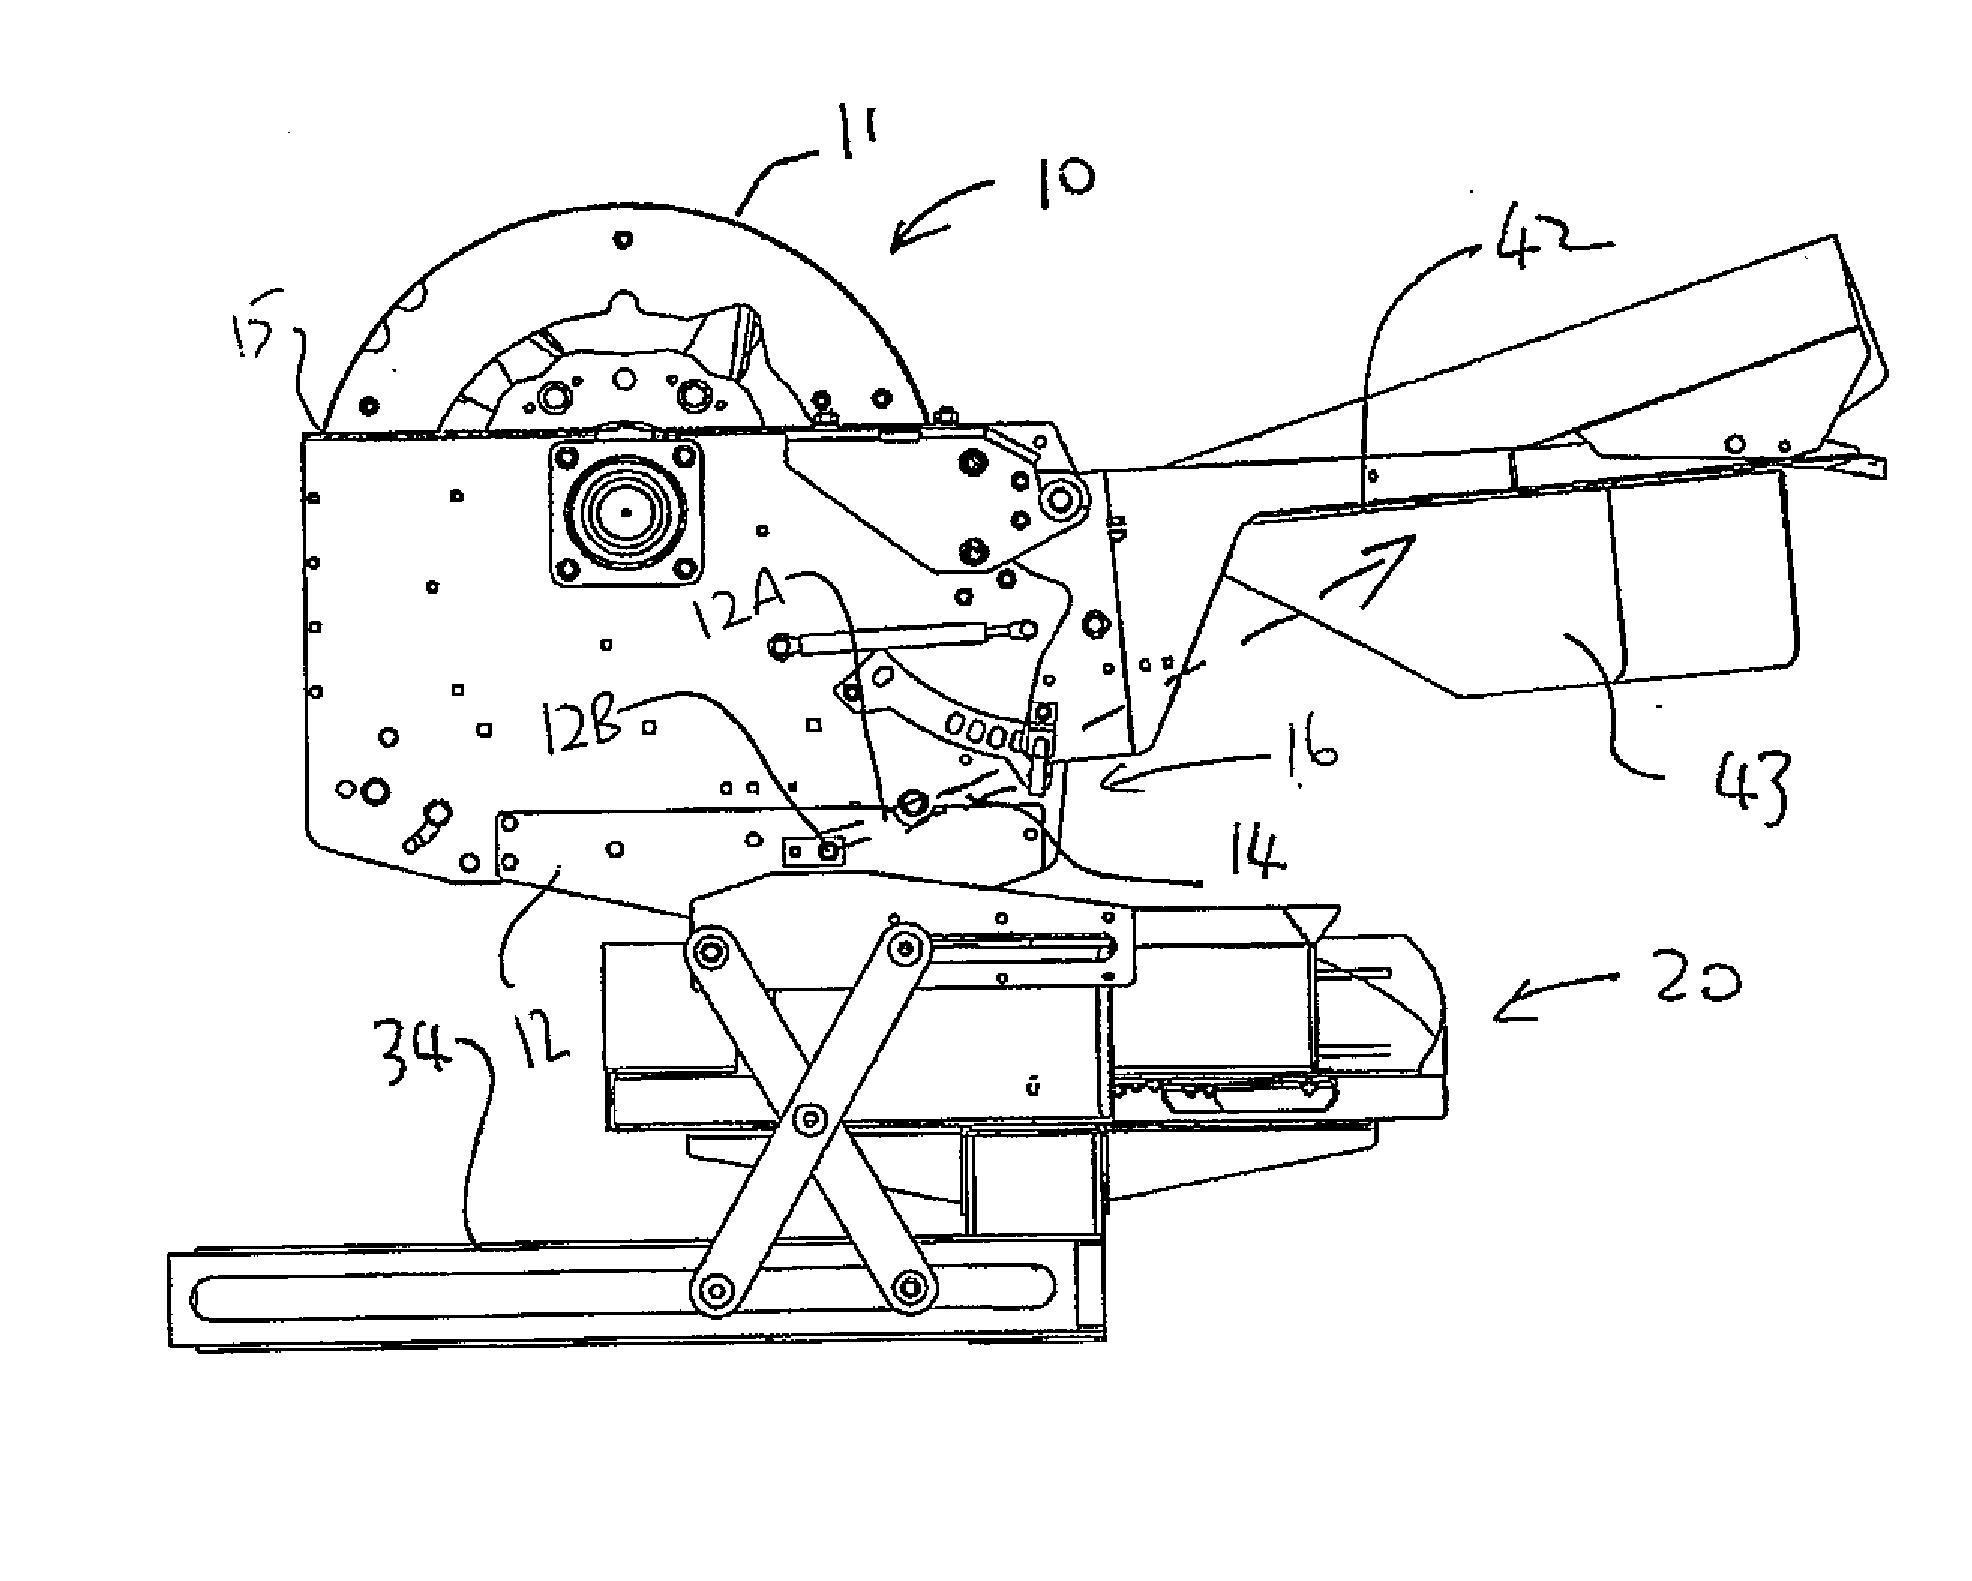 Apparatus for Chopping and Discharging Straw from a Combine Harvester